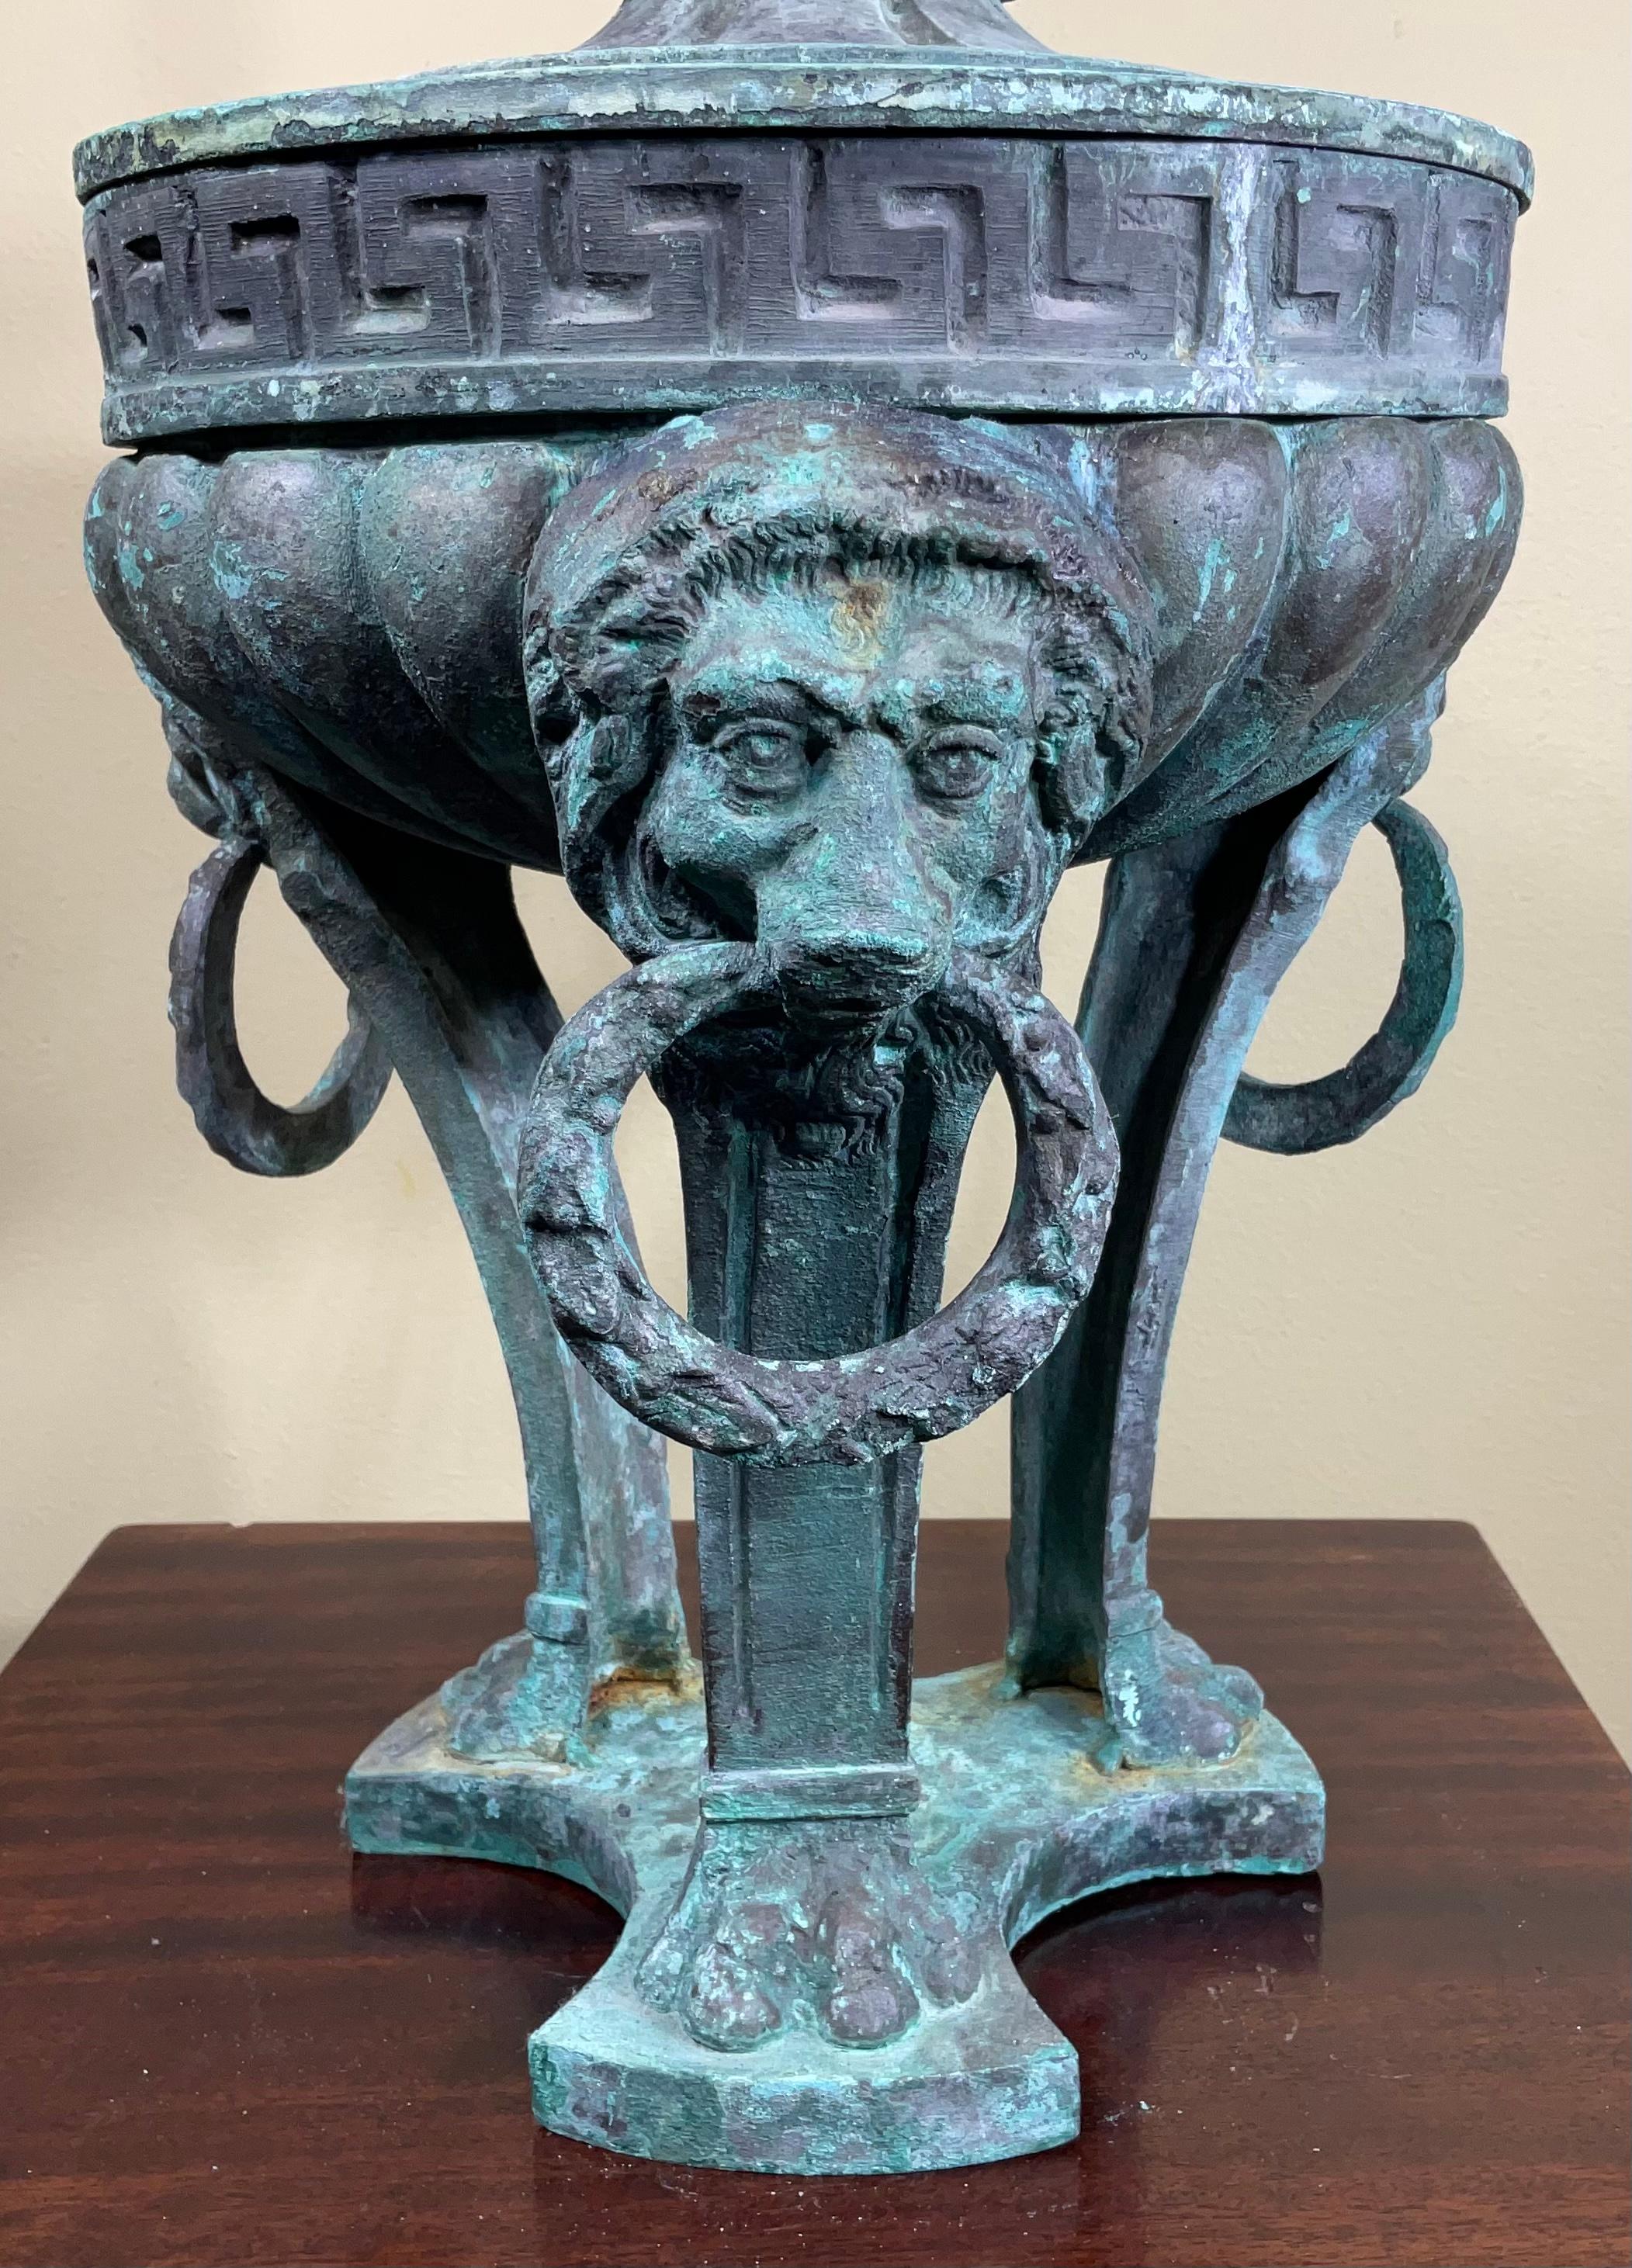 Exceptional antique French bronze architectural element used as decorative object of art. Beautiful oxidized green-turquoise patina, lion heads vines and Greek key motif. one of a kind object of art for display.